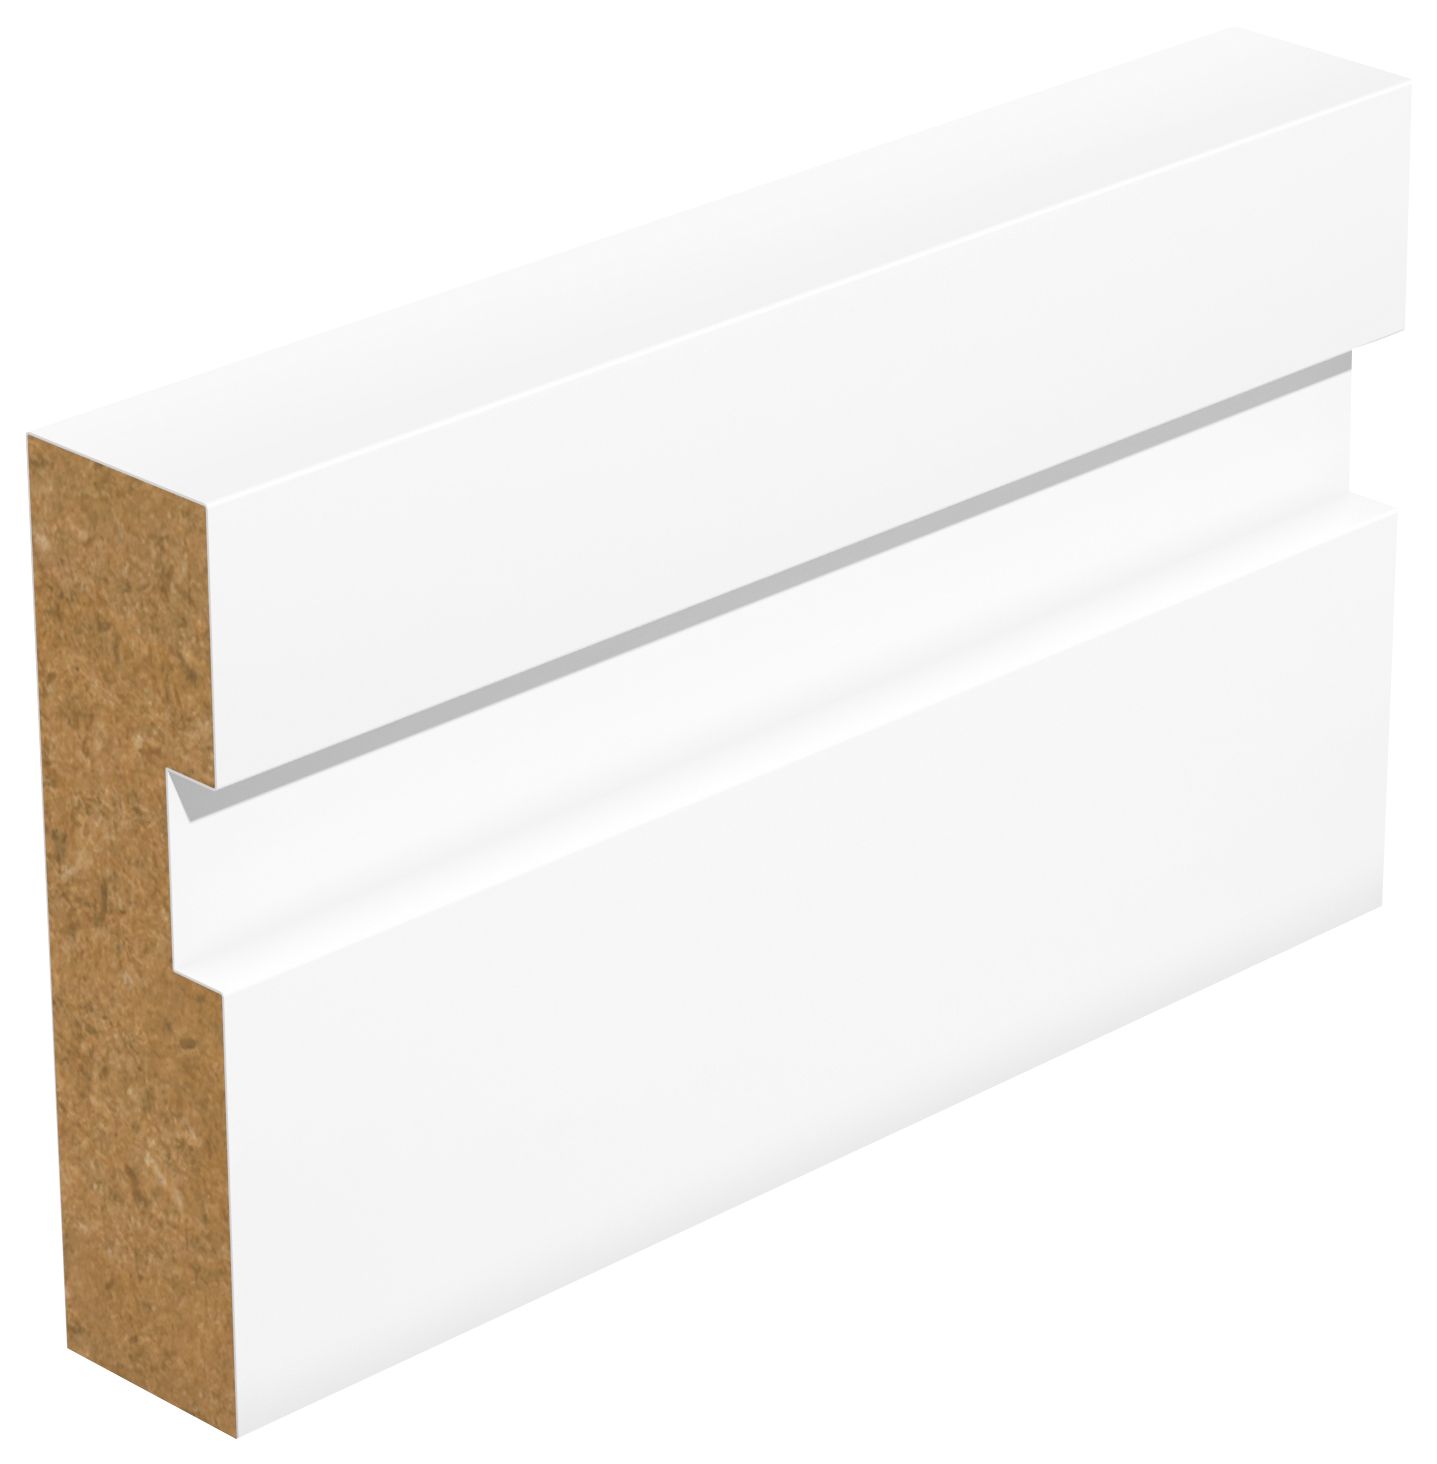 Image of Wickes Grooved Square Edge MDF Architrave - 18 x 69mm x 2100mm - Pack of 5